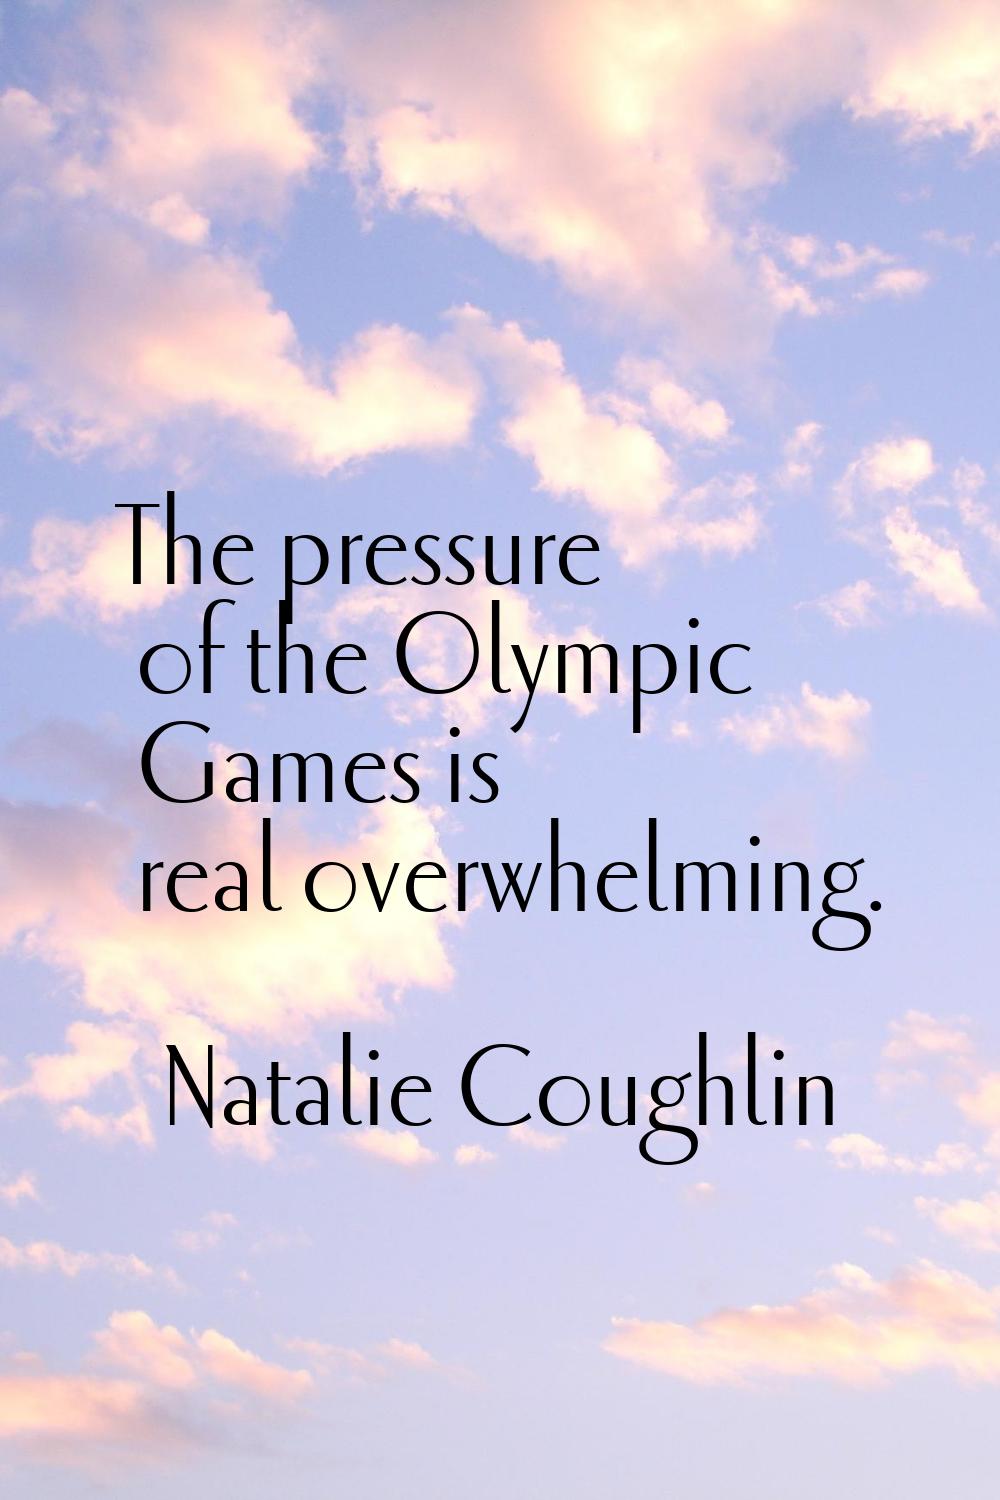 The pressure of the Olympic Games is real overwhelming.